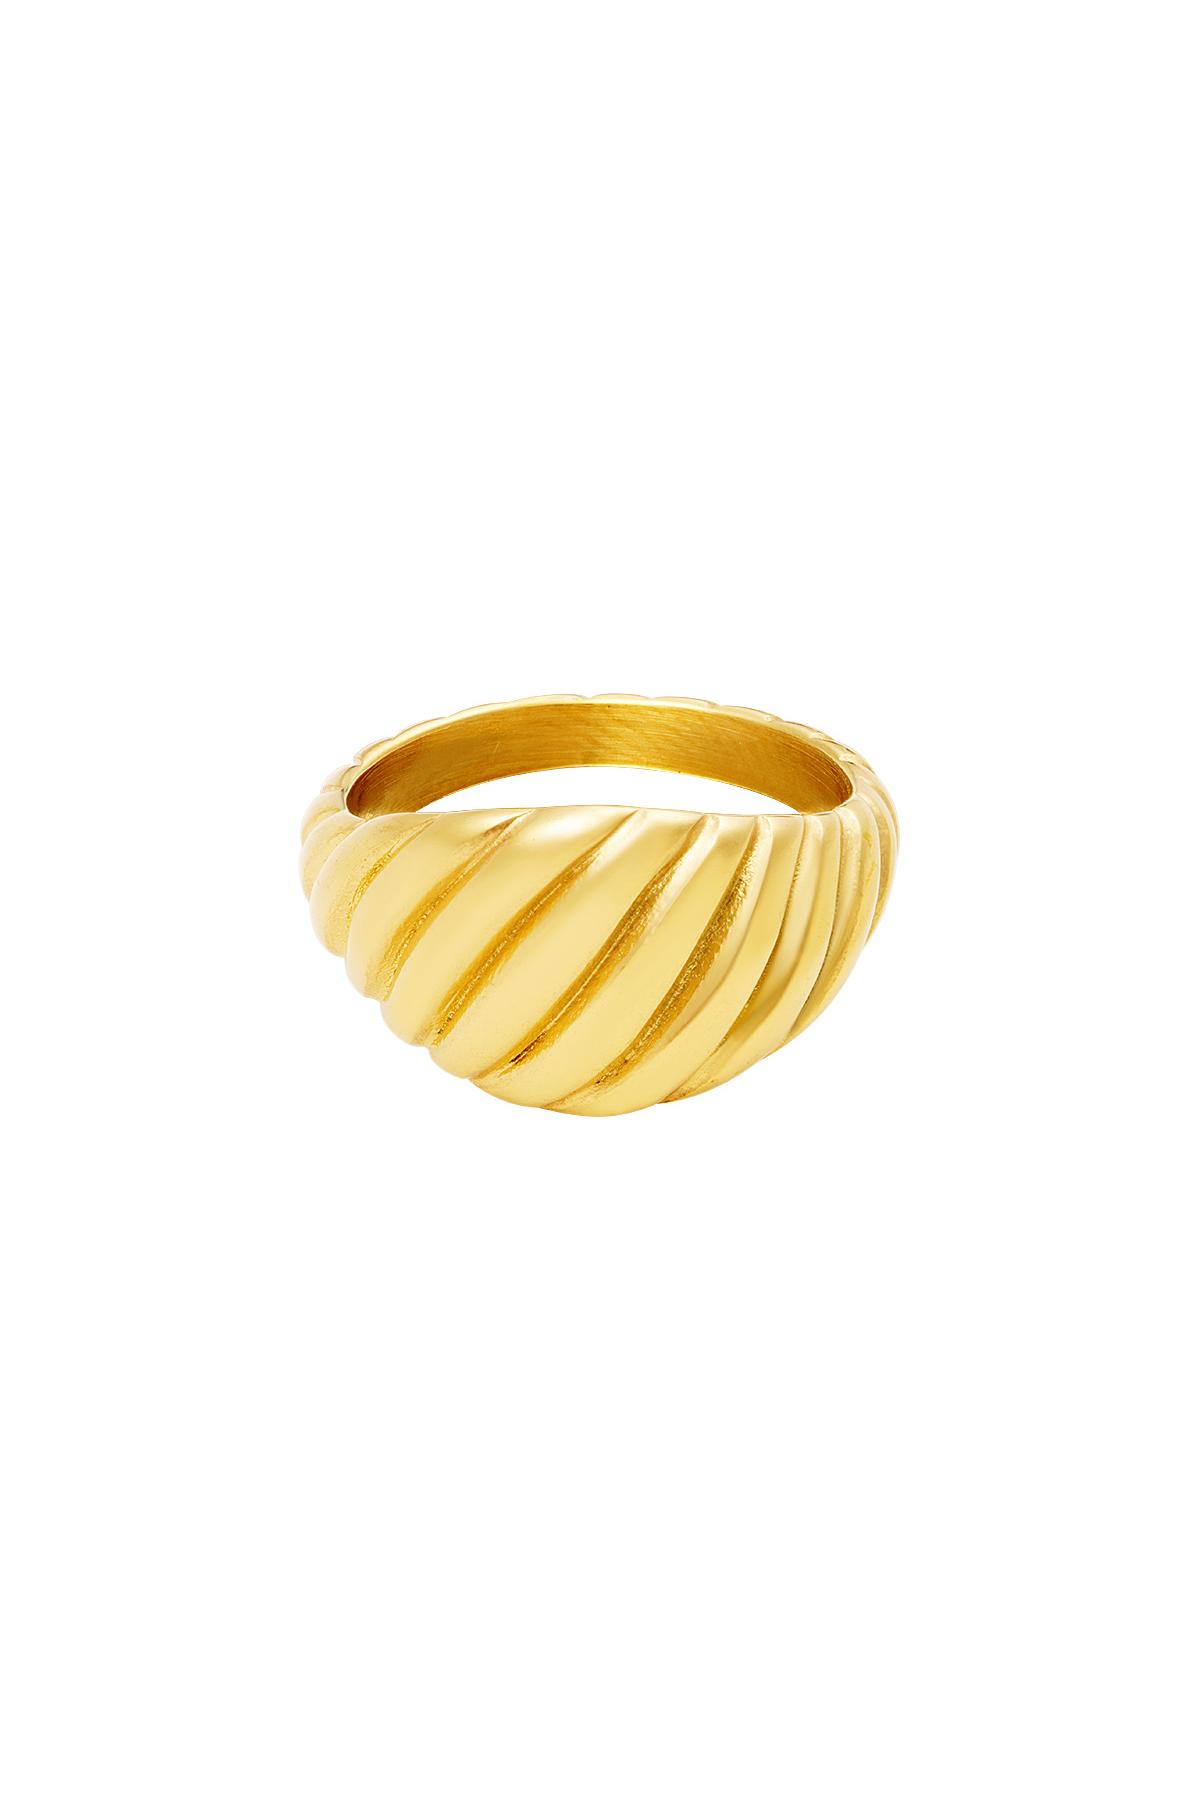 Ring baquette Gold Stainless Steel 16